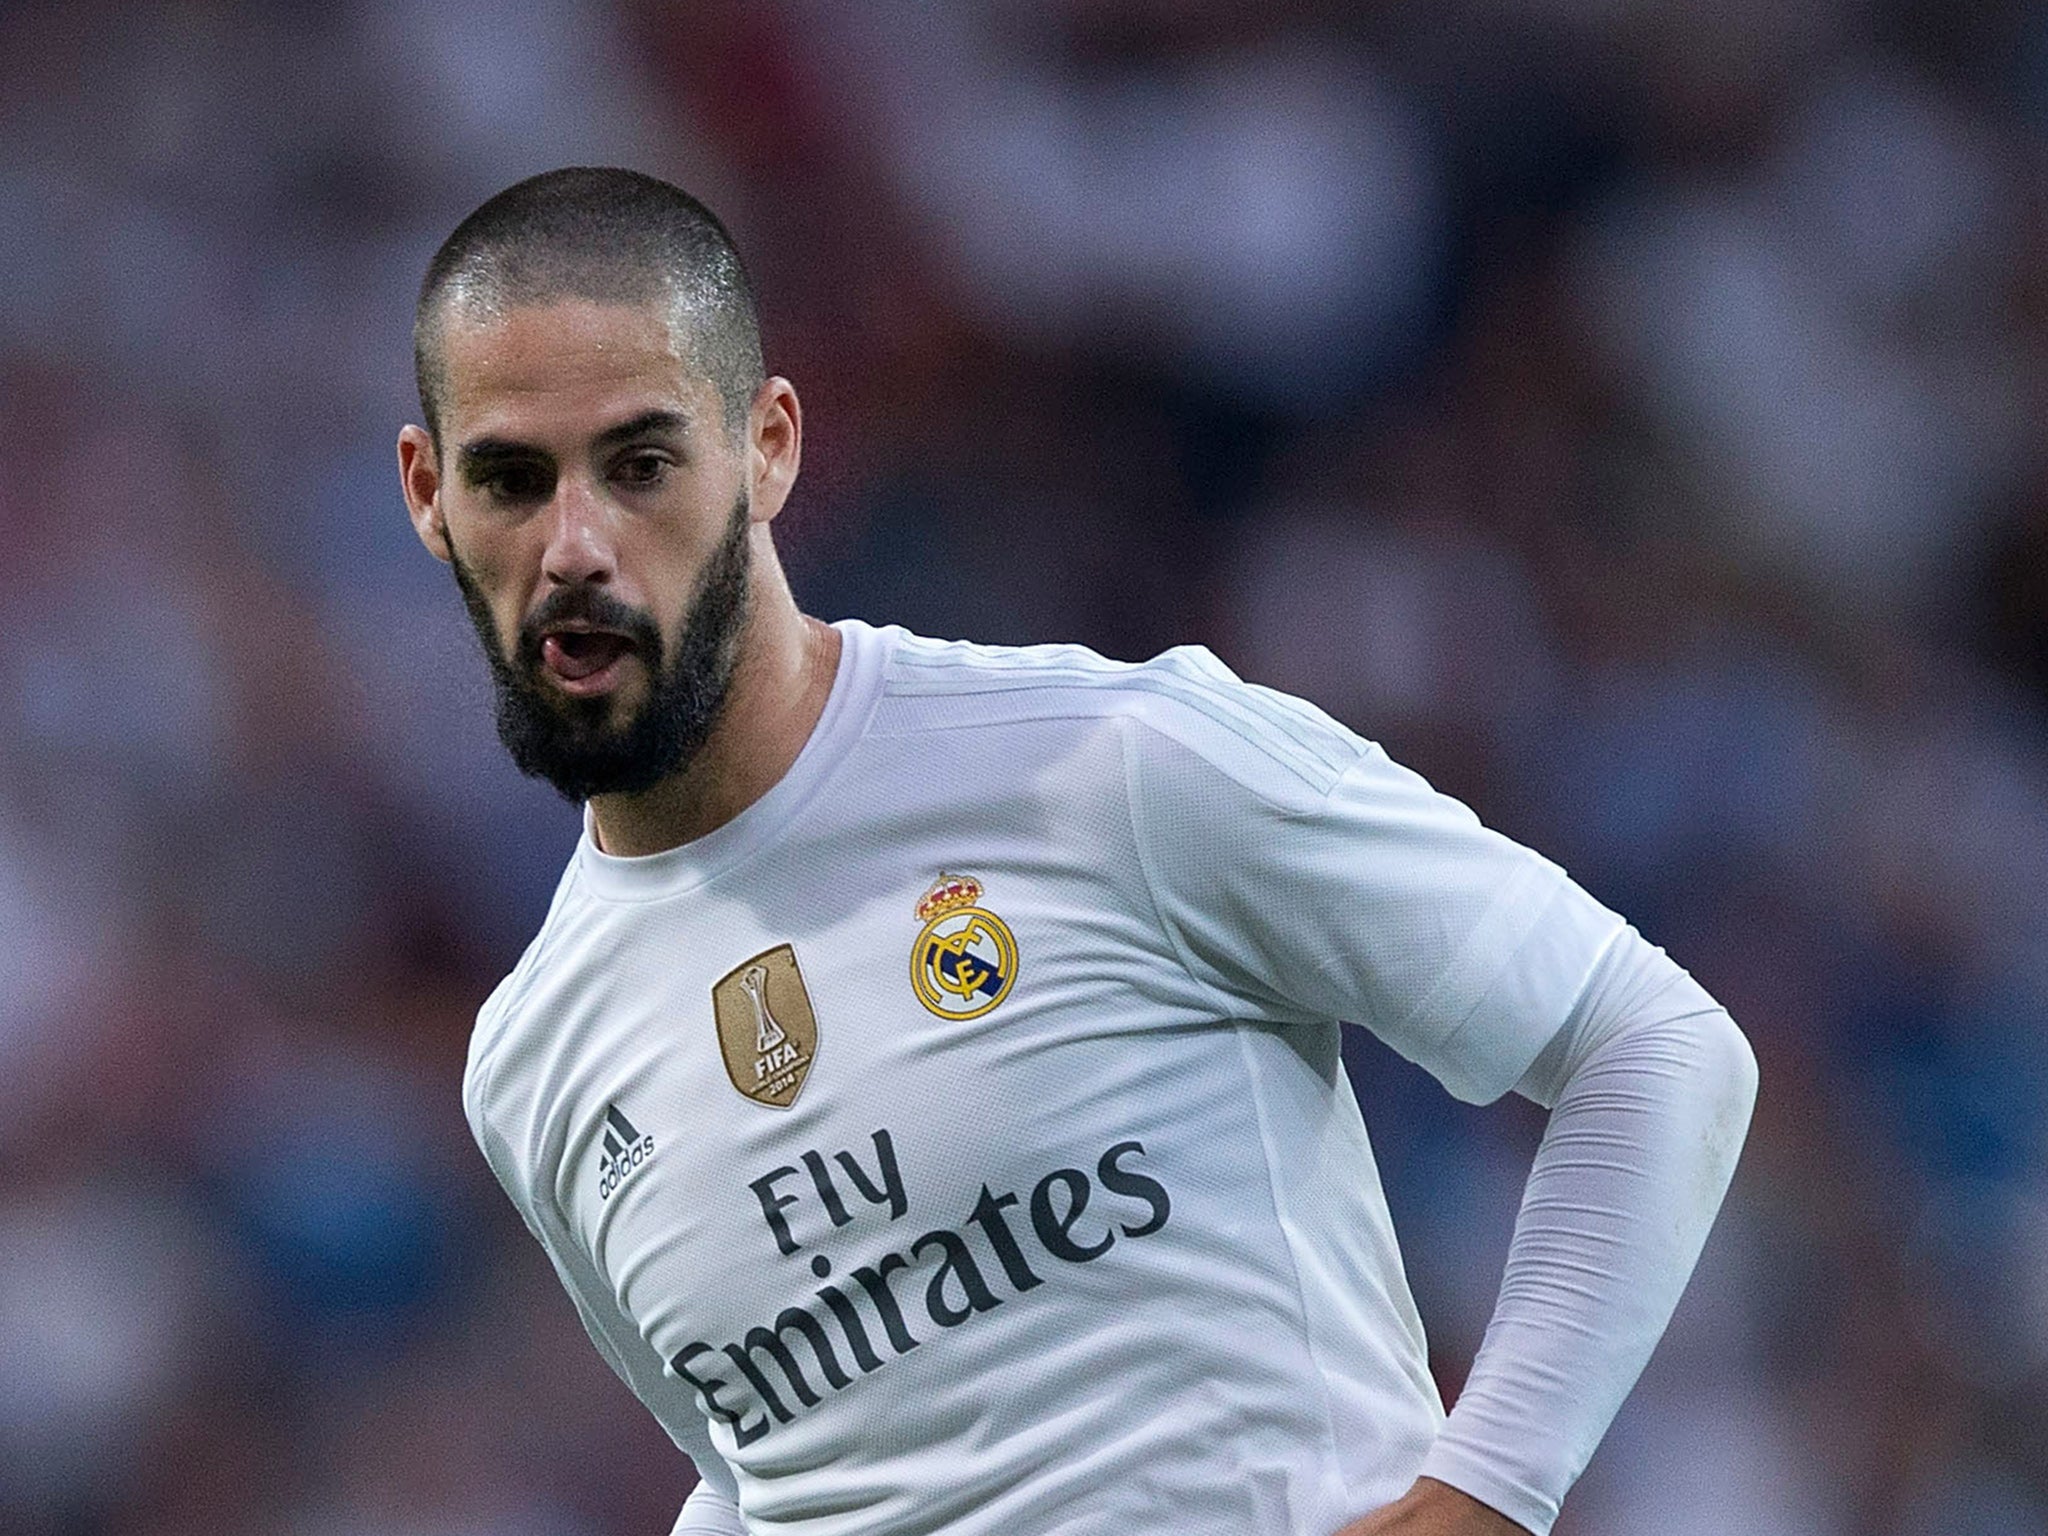 Real Madrid attacking midfielder Isco